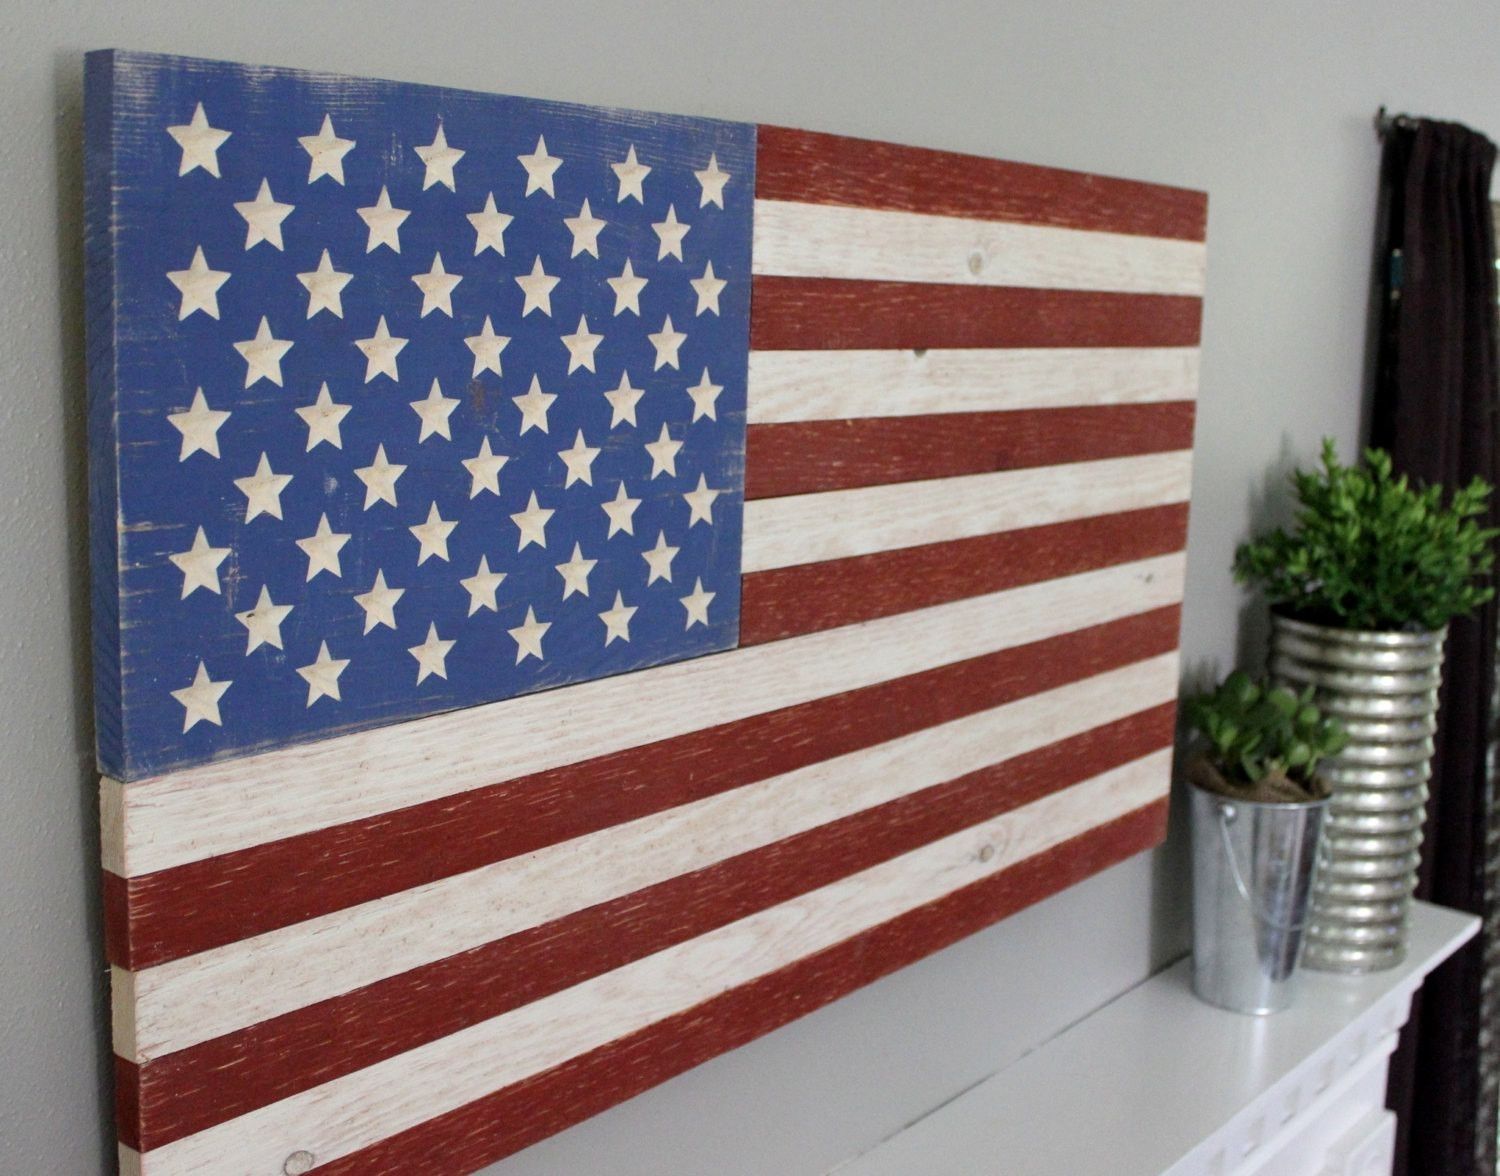 Awesome Best Wood American Photos Of Flag Wall Decor Eprodutivocom Inside Wooden American Flag Wall Art (View 6 of 20)